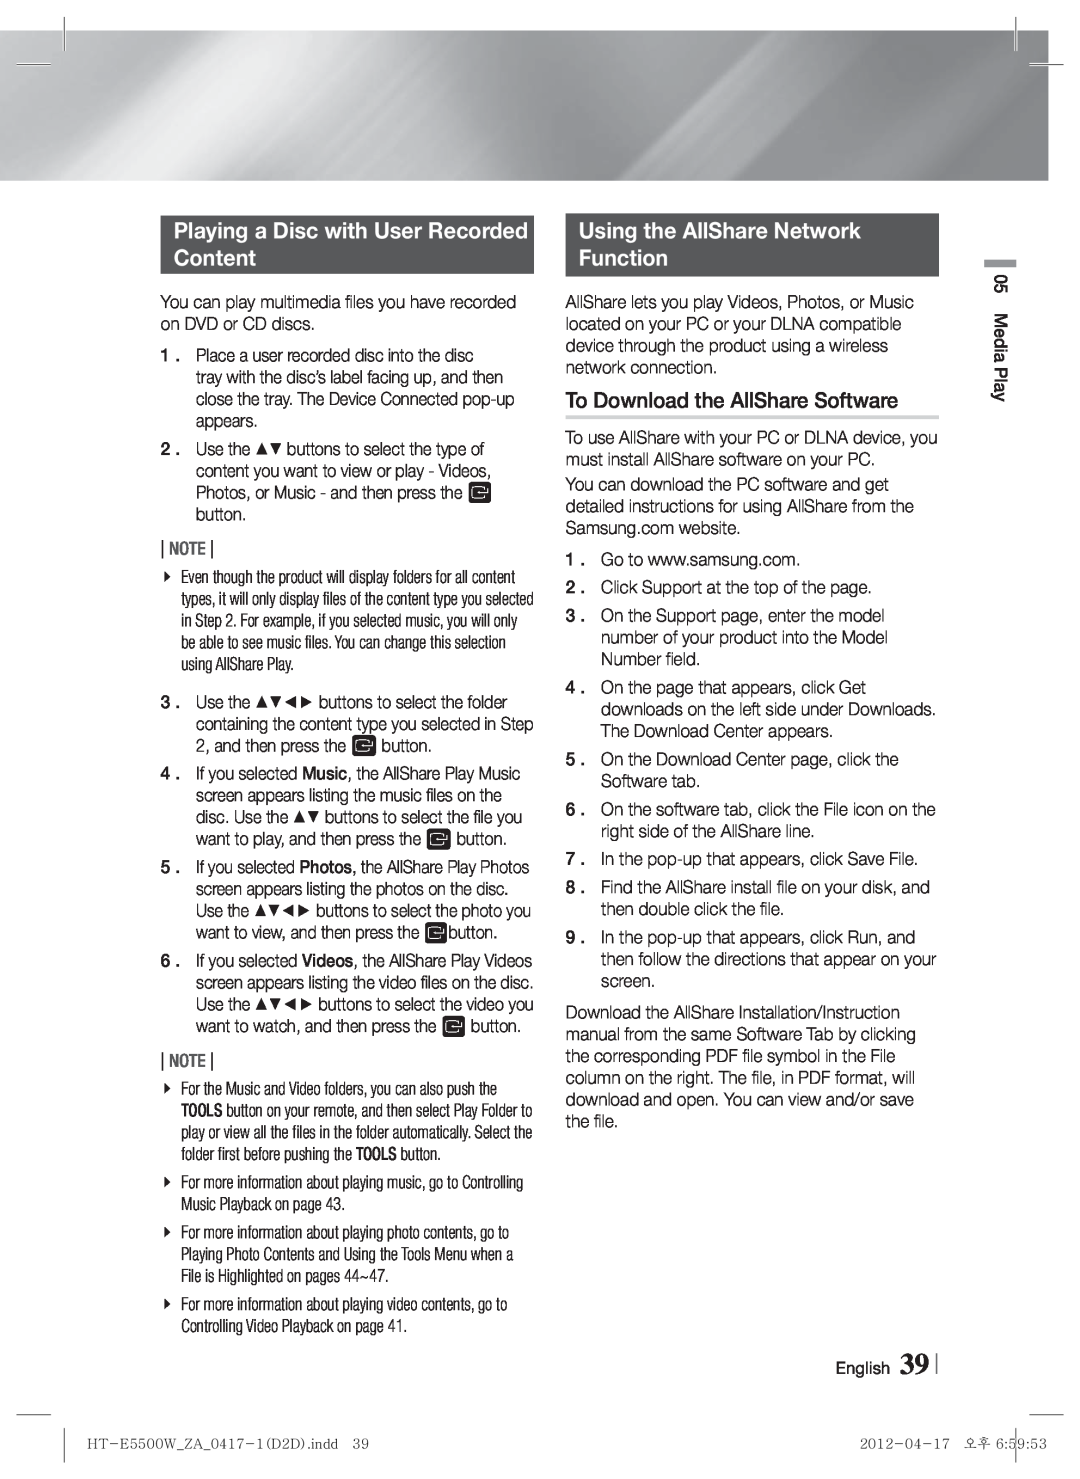 Samsung HT-E550 user manual Playing a Disc with User Recorded Content, Using the AllShare Network Function, Note 